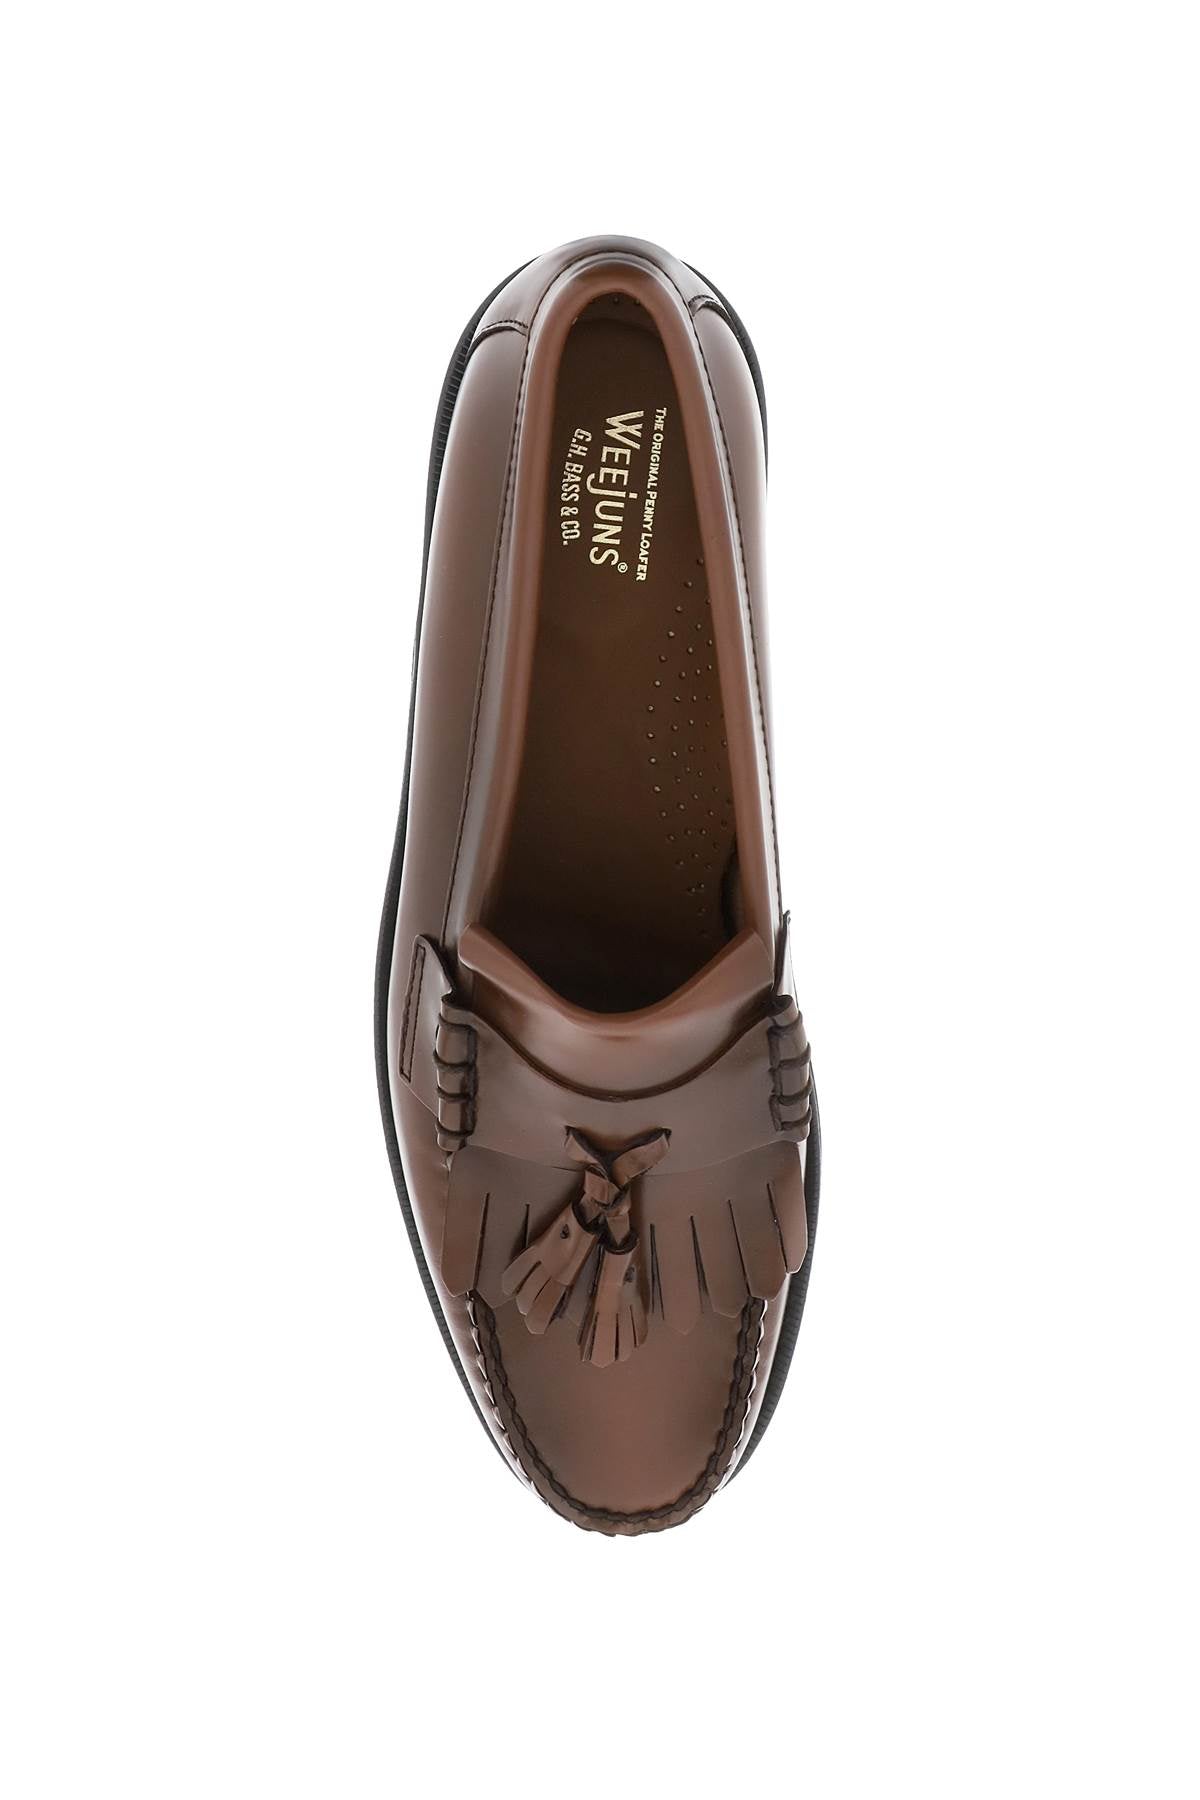 G.h. bass esther kiltie weejuns loafers-1